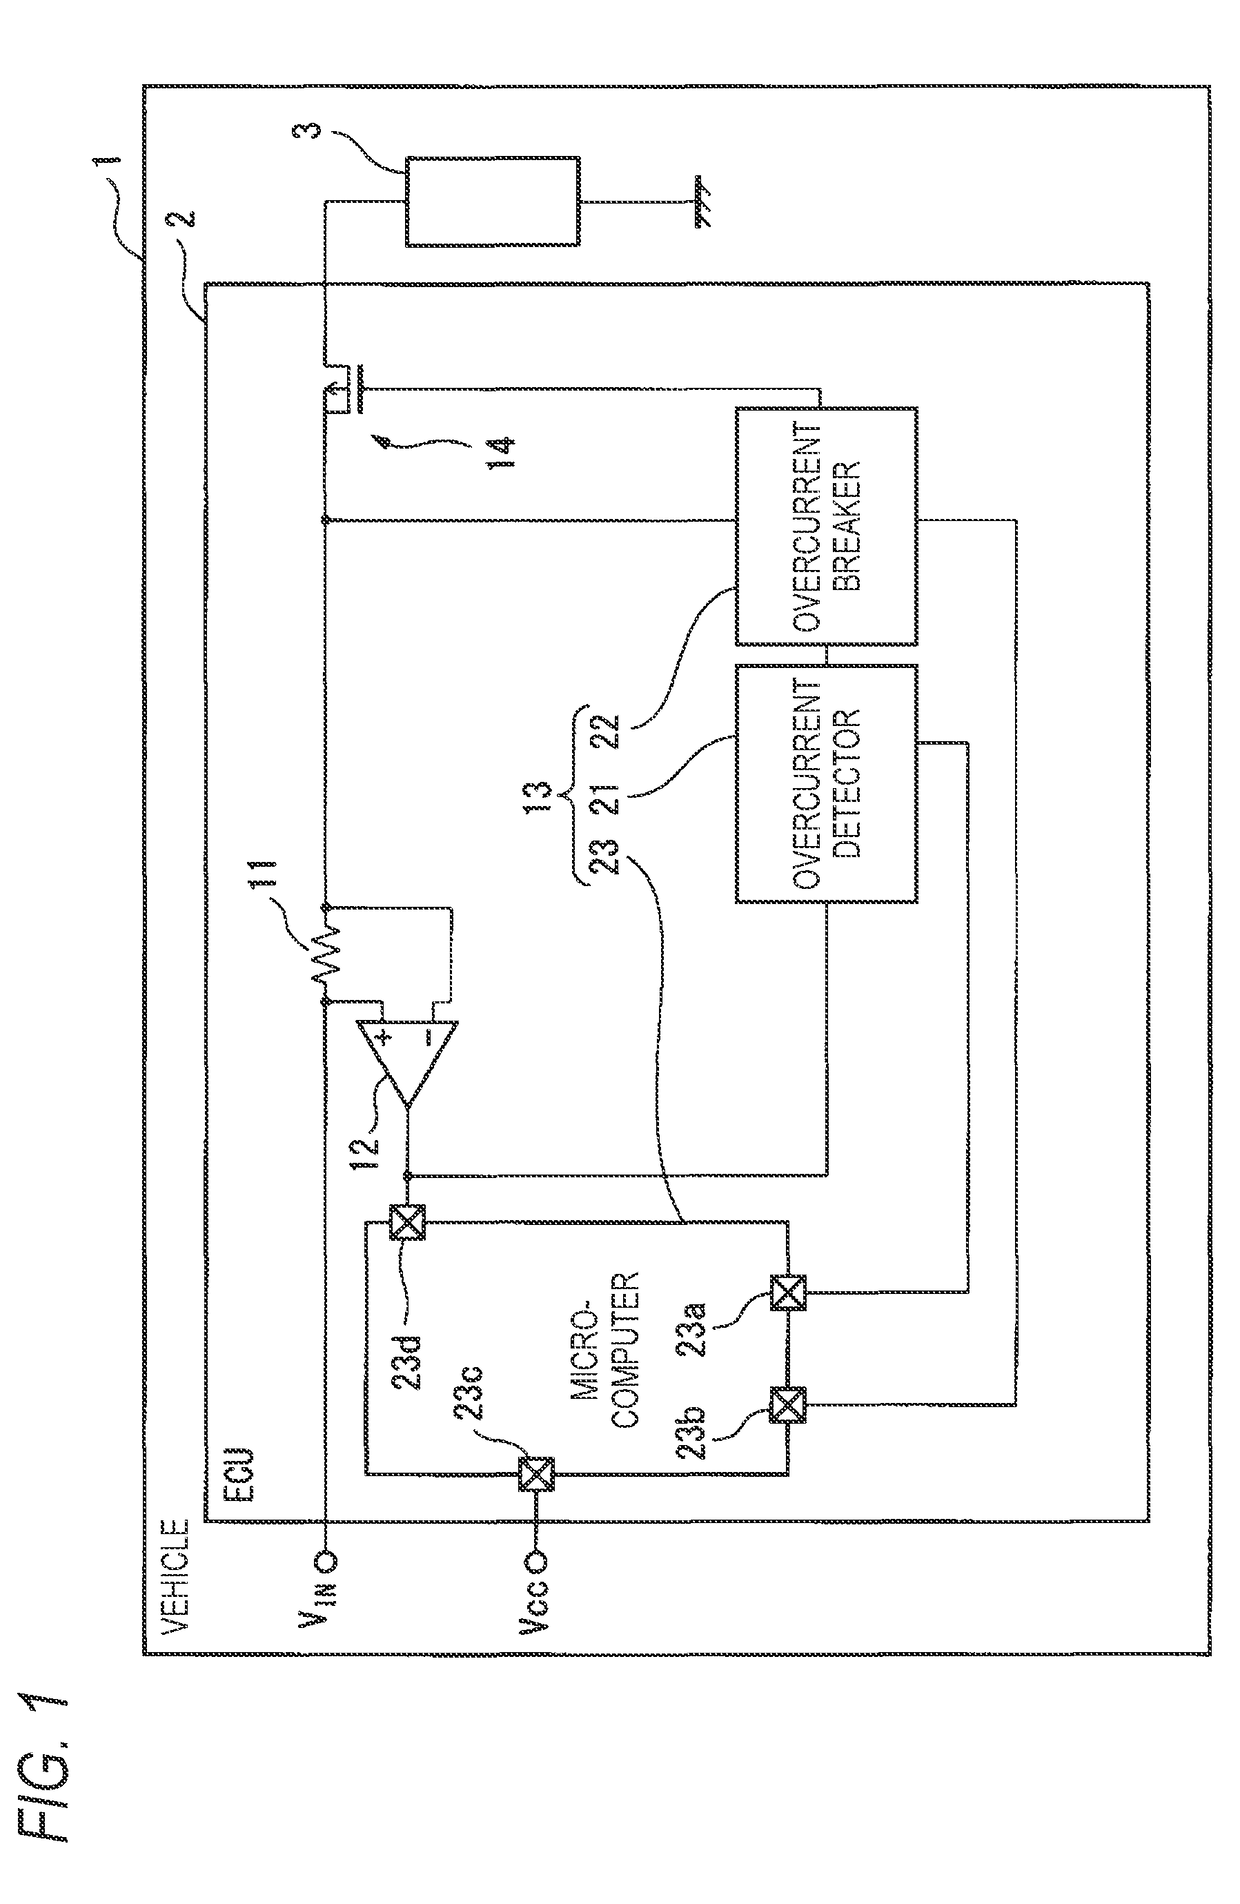 Overcurrent protection device and vehicular electronic control unit